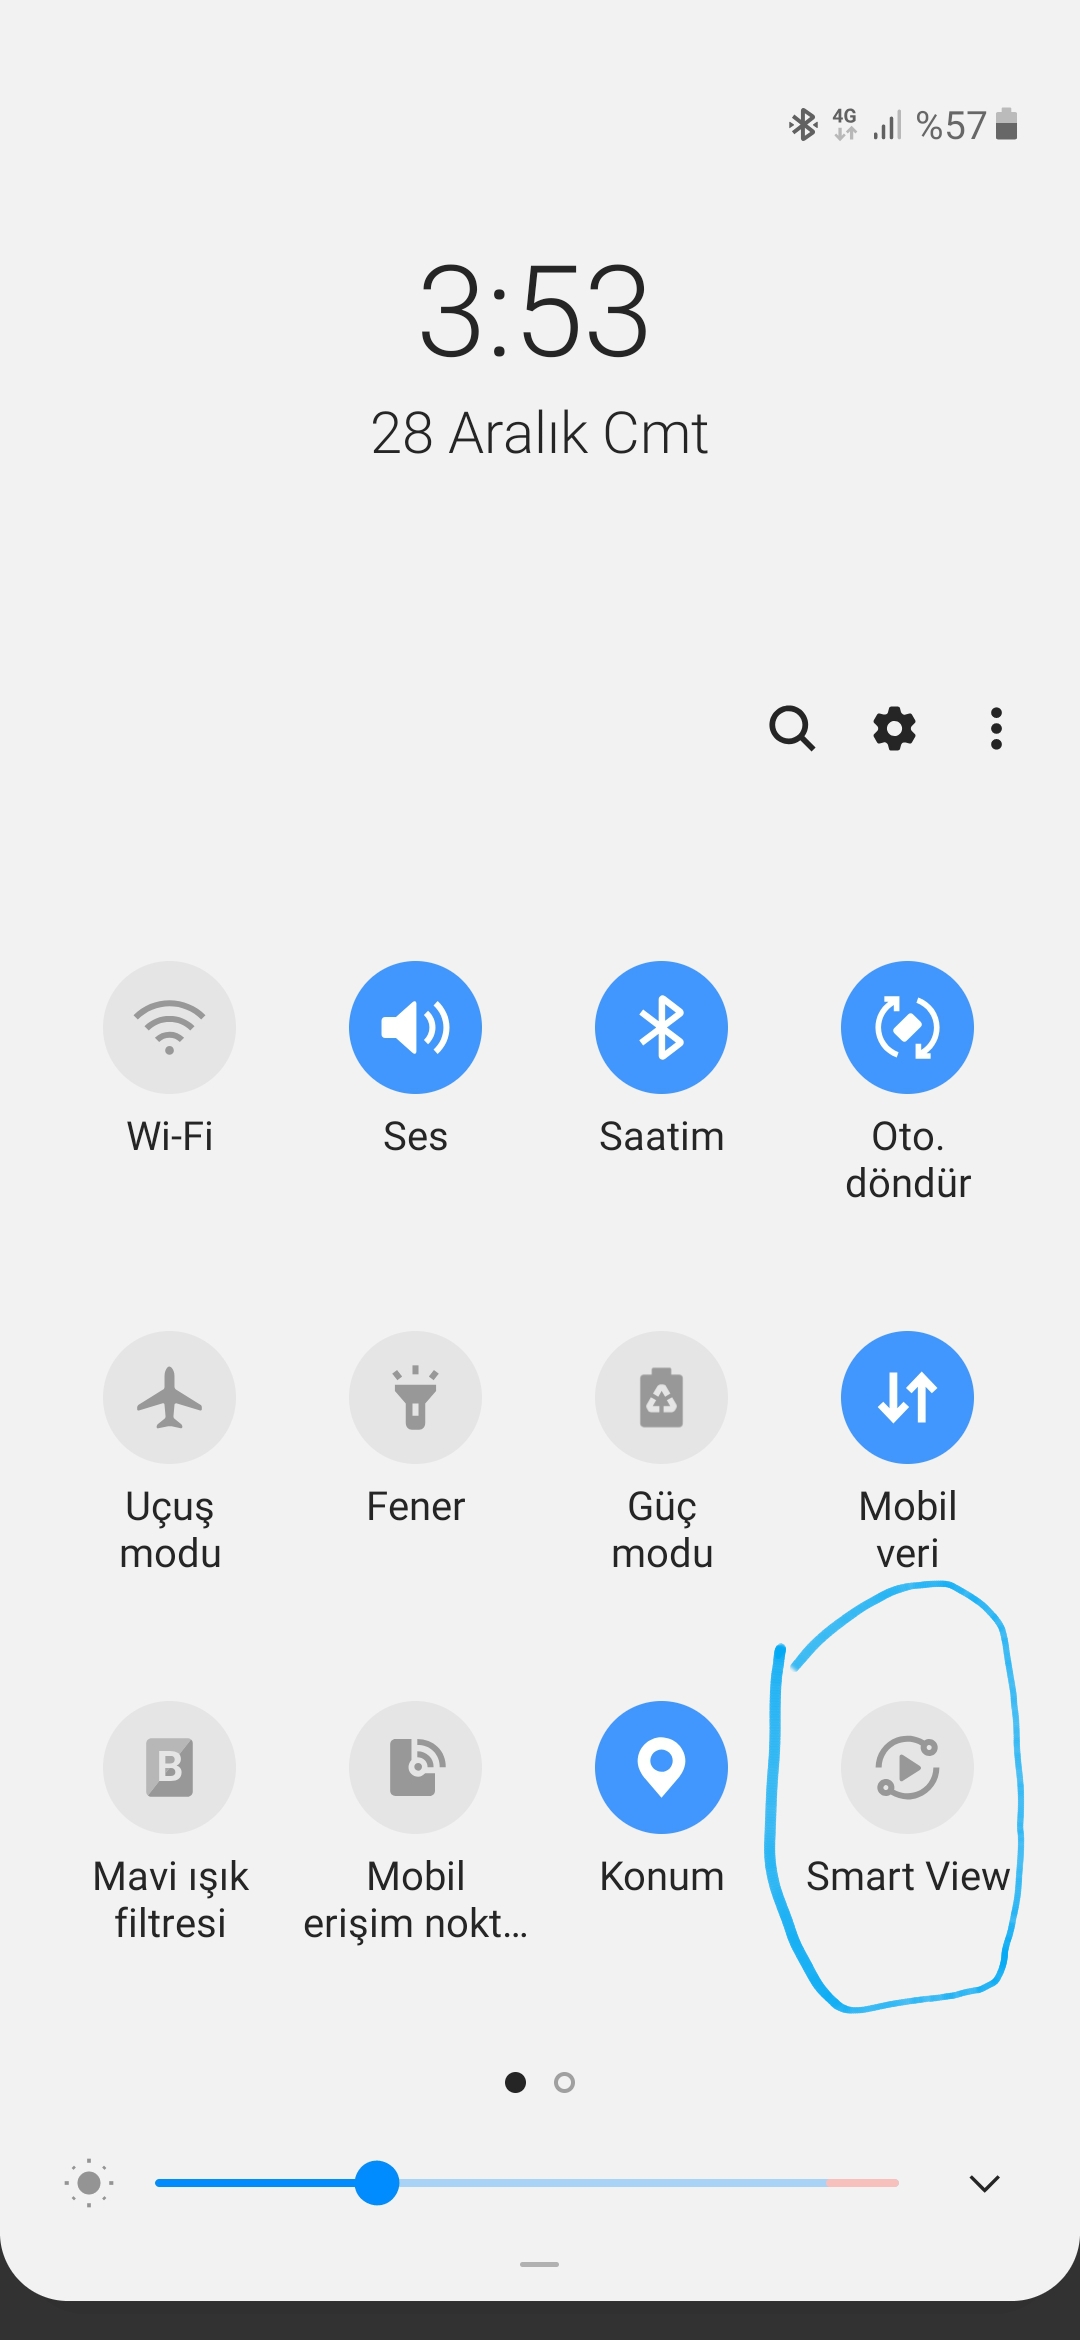 Solved: samsung A10S - Samsung Members